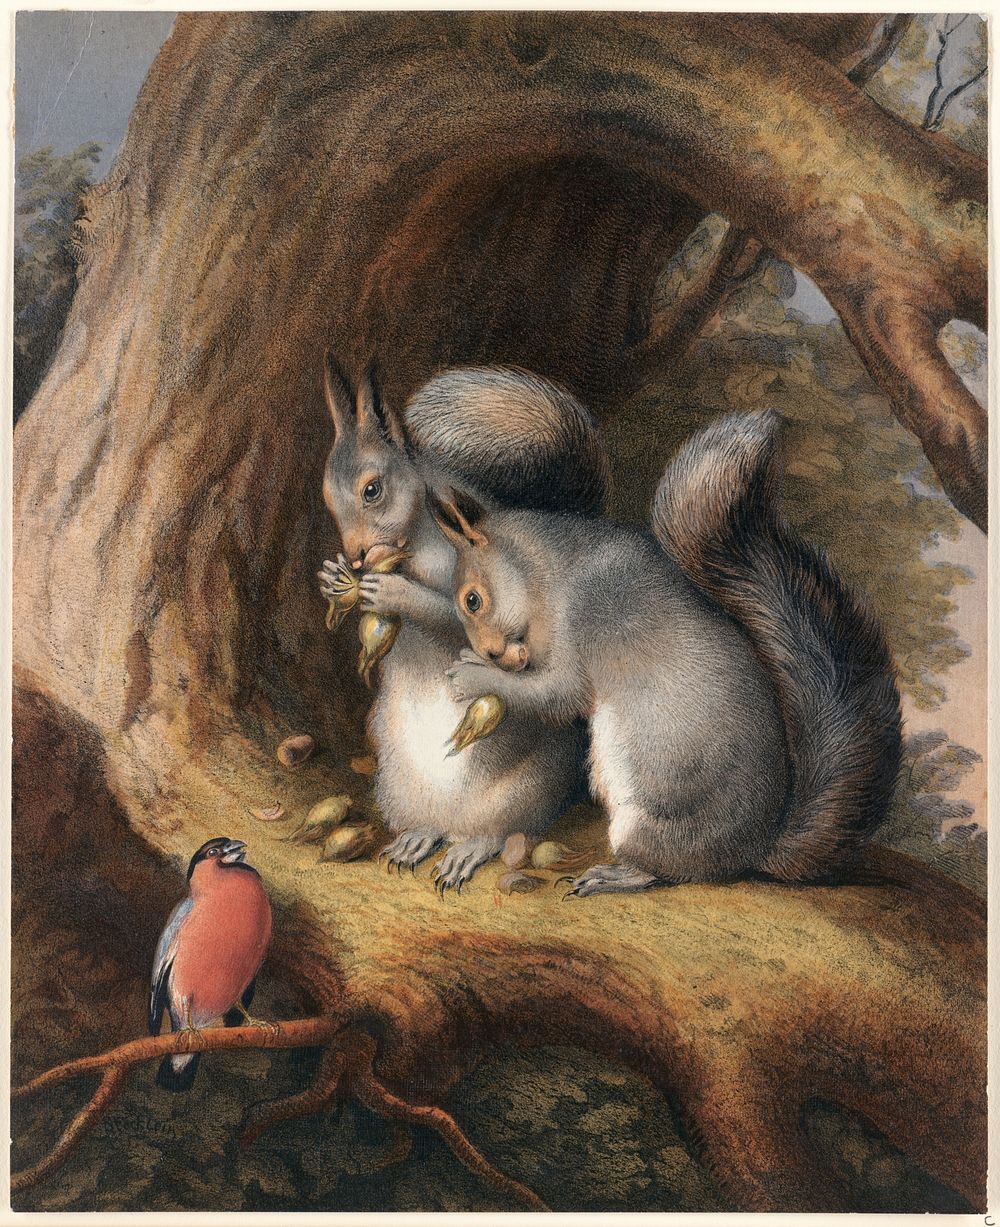             The squirrels and bird under a tree          